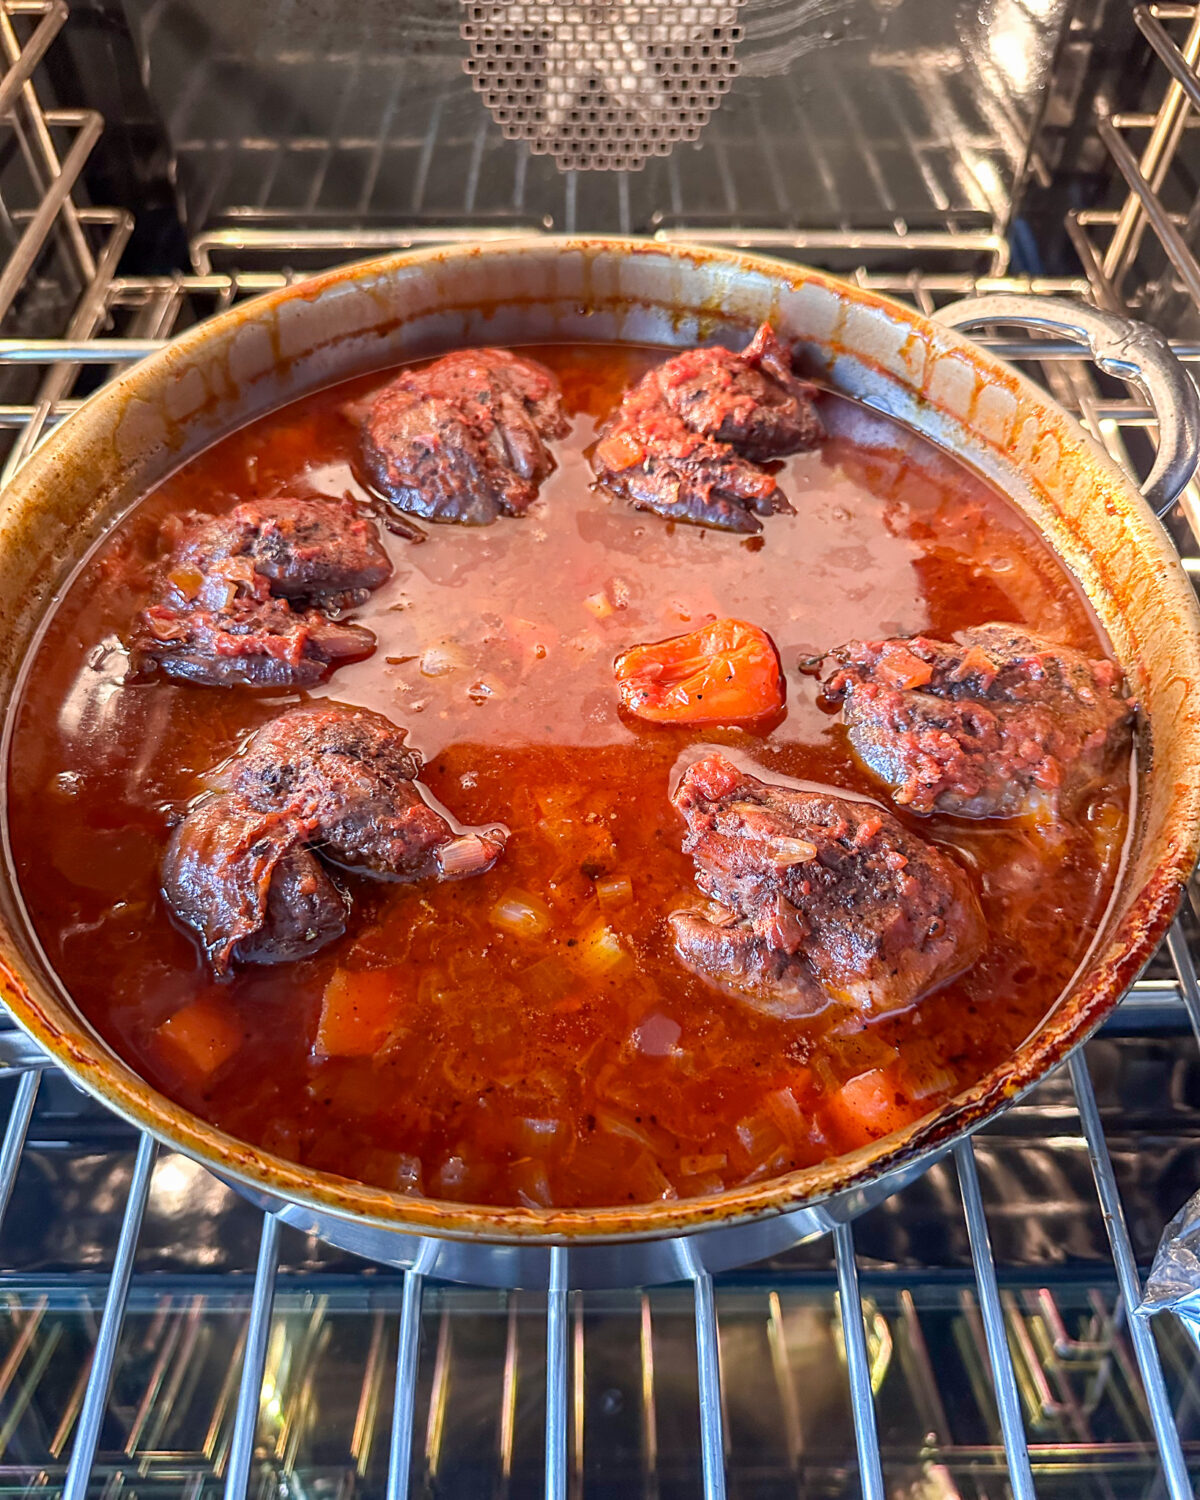 Braised lamb shanks in a tomato sauce. 